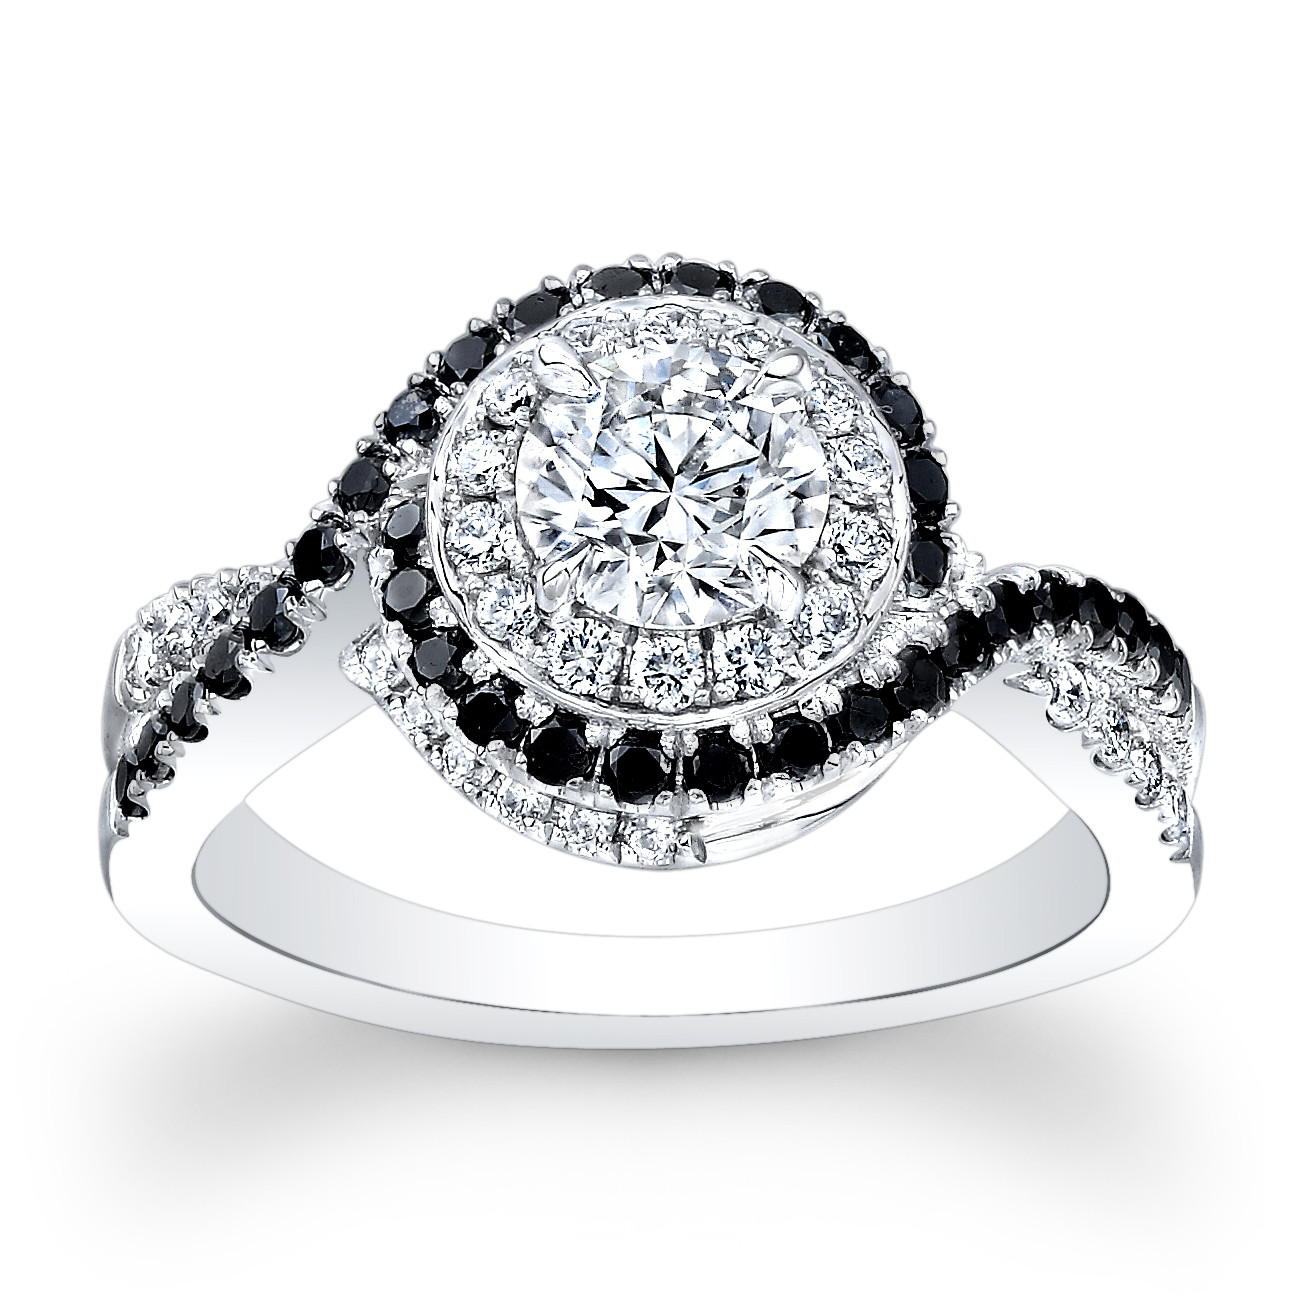 Engagement Rings With Black Diamond Accents
 Black Accents Black Diamond Engagement Rings